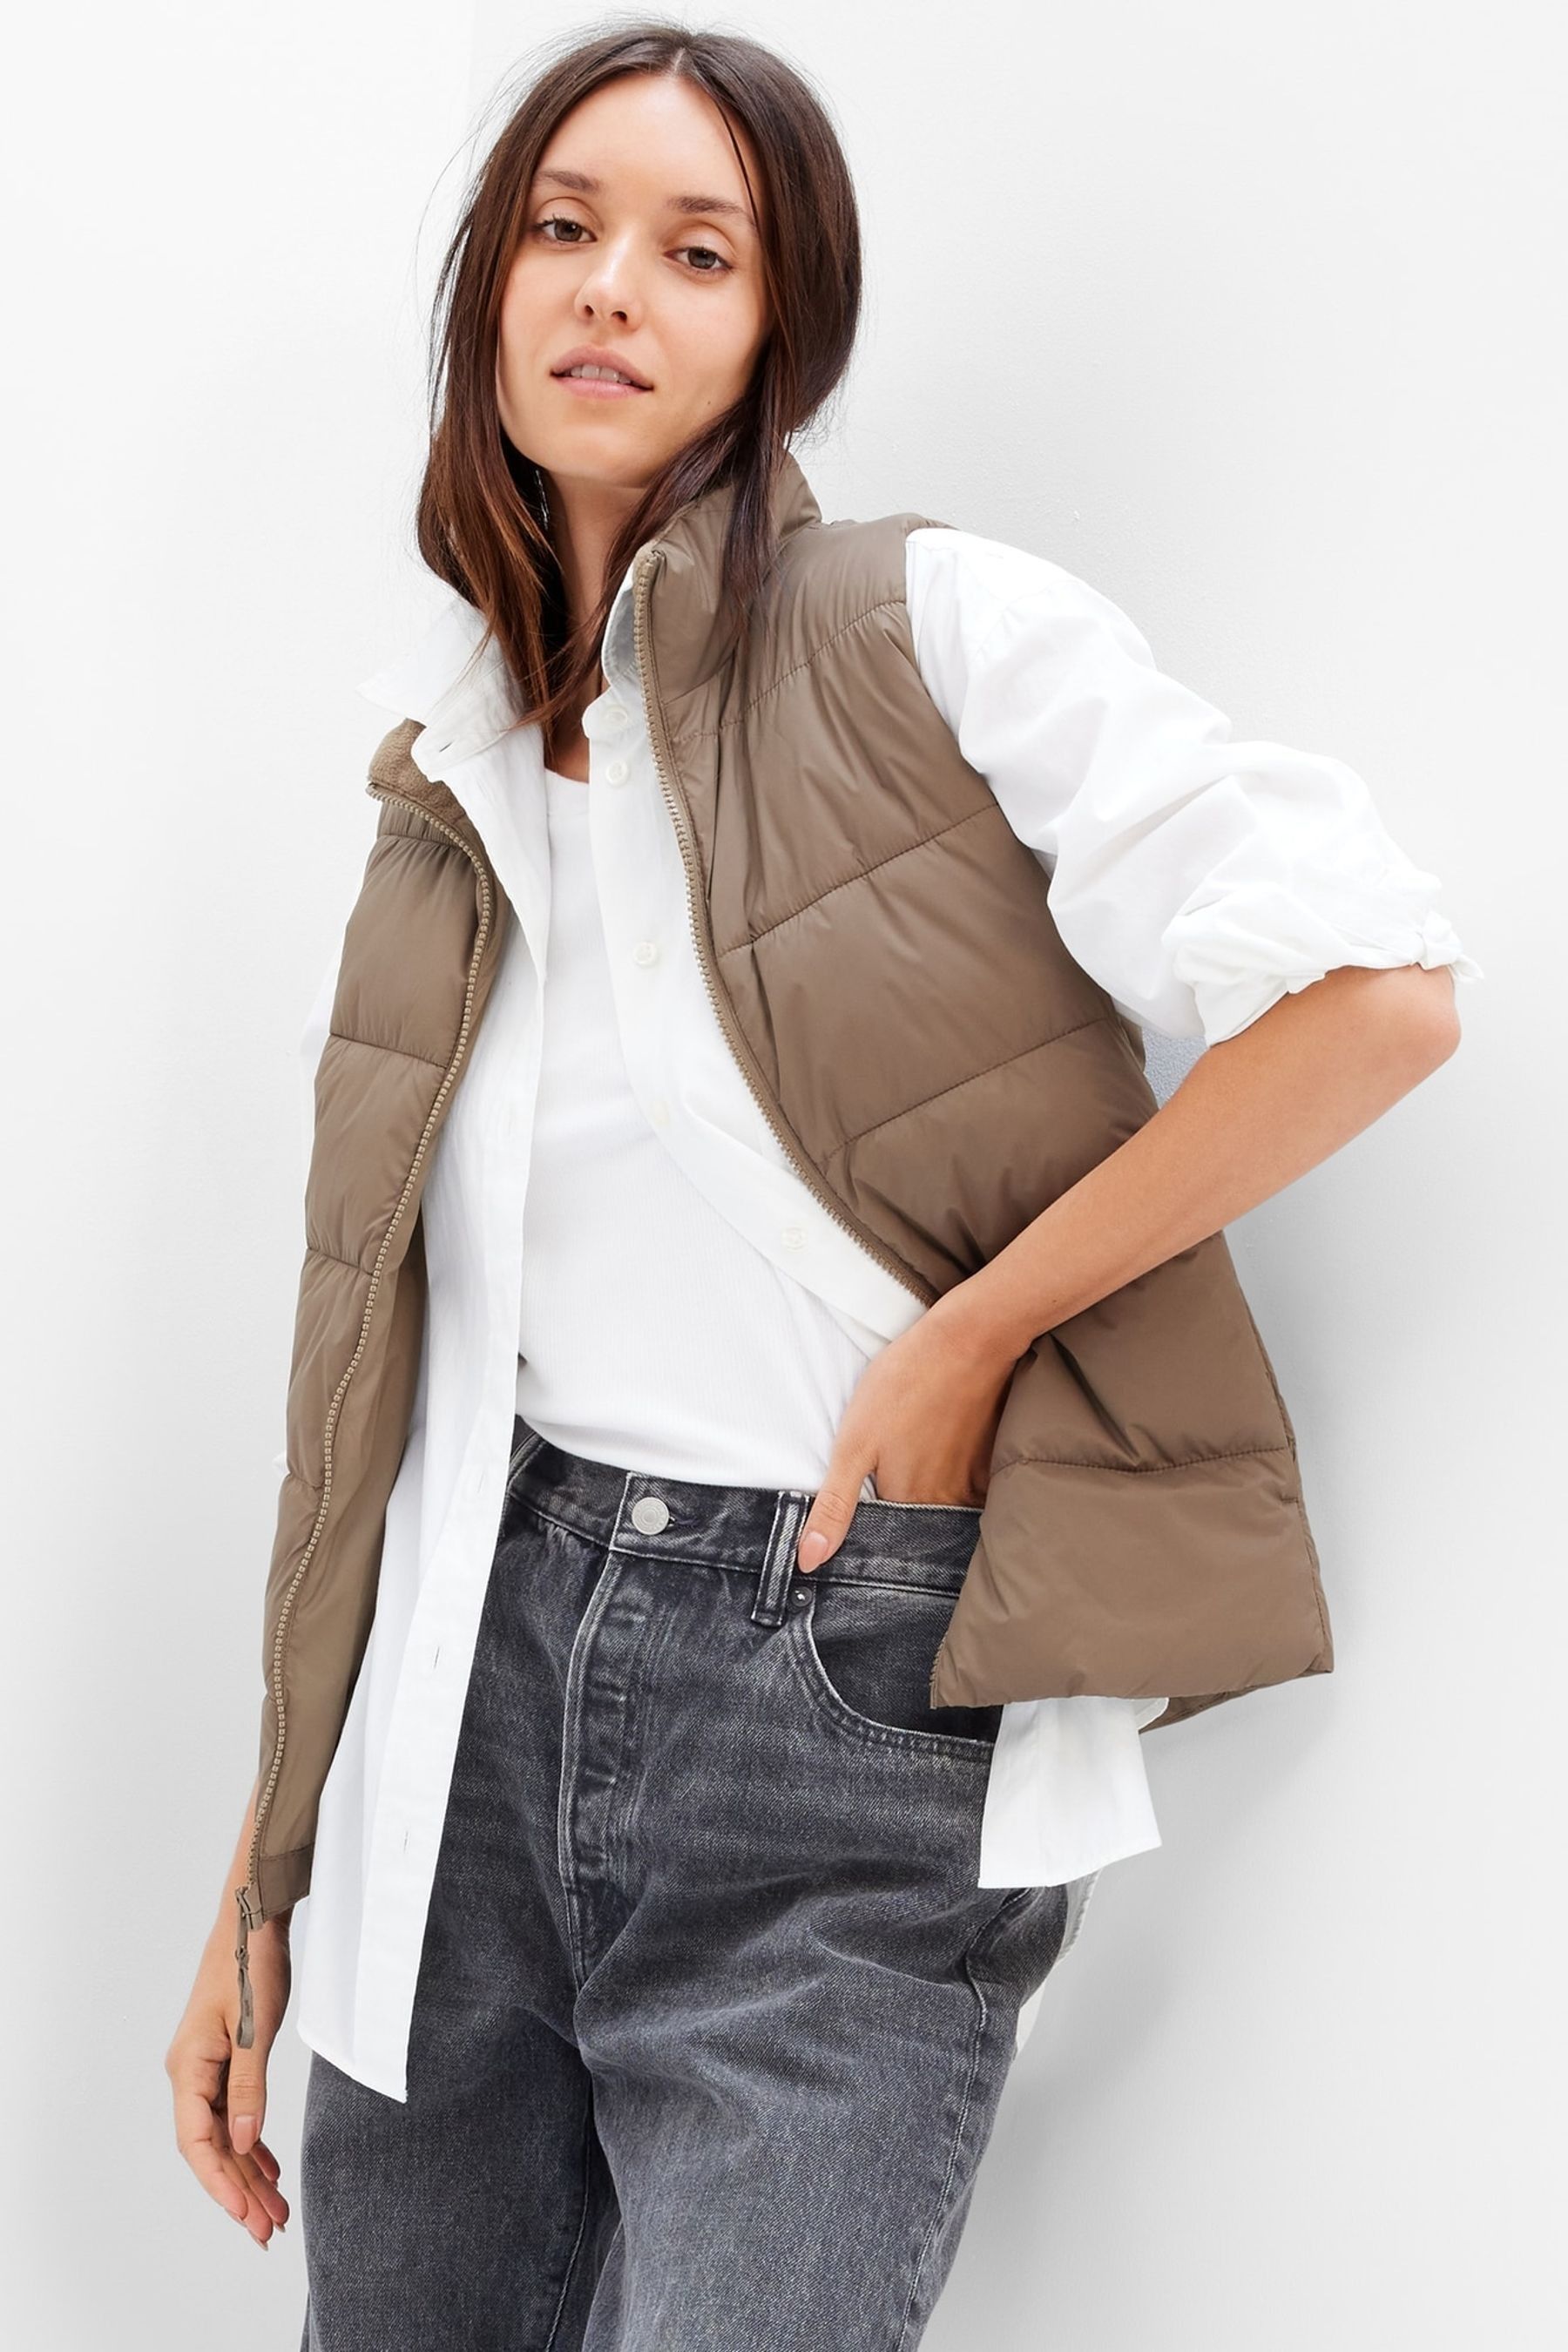 Buy Cold Control Puffer Gilet Vest from the Gap online shop